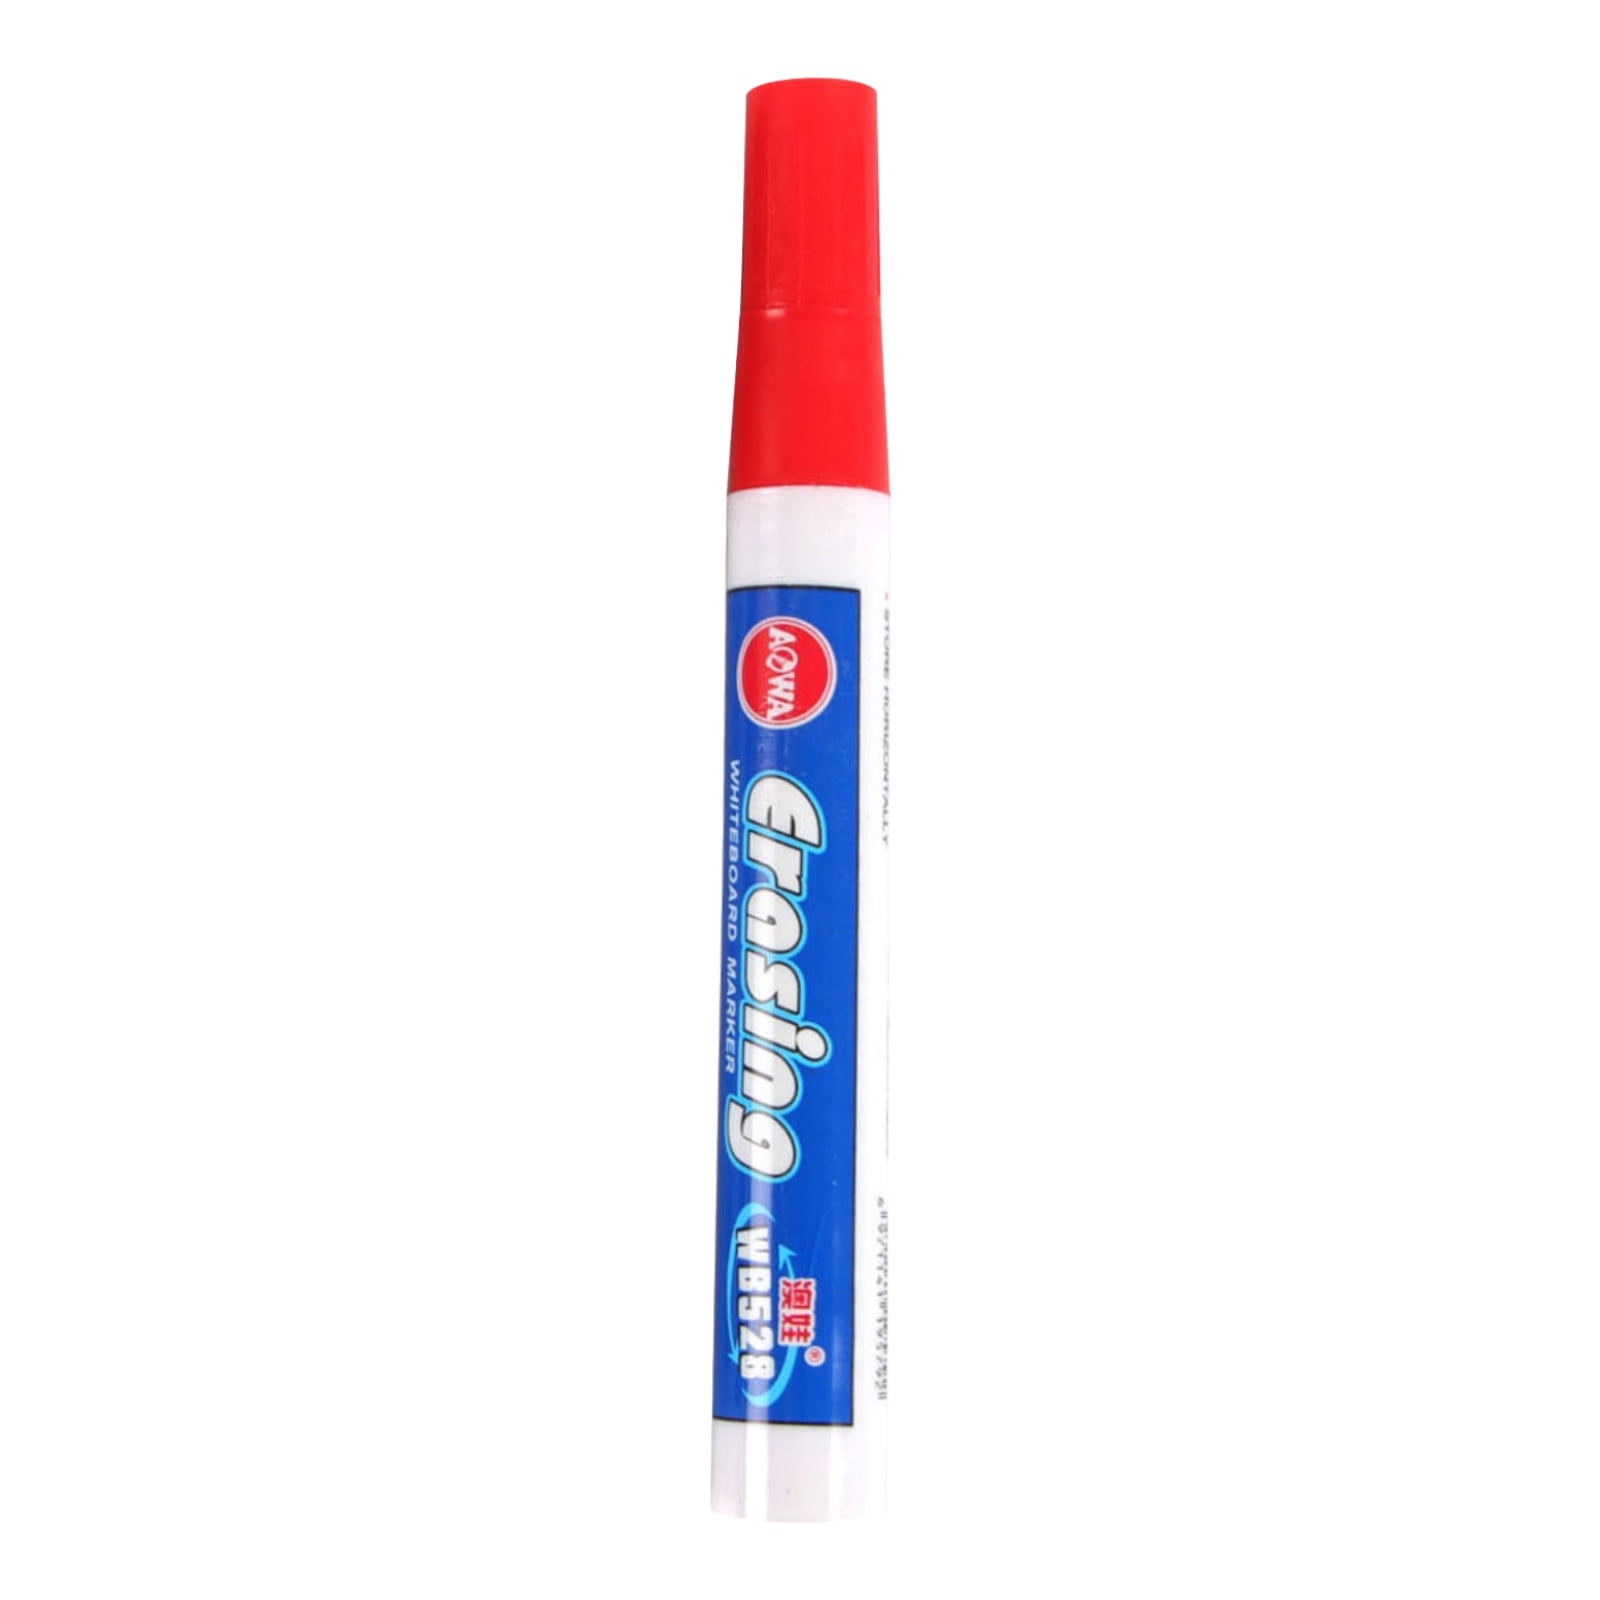 Julam Magical Water Painting Pen - Magic Markers with Spoon and